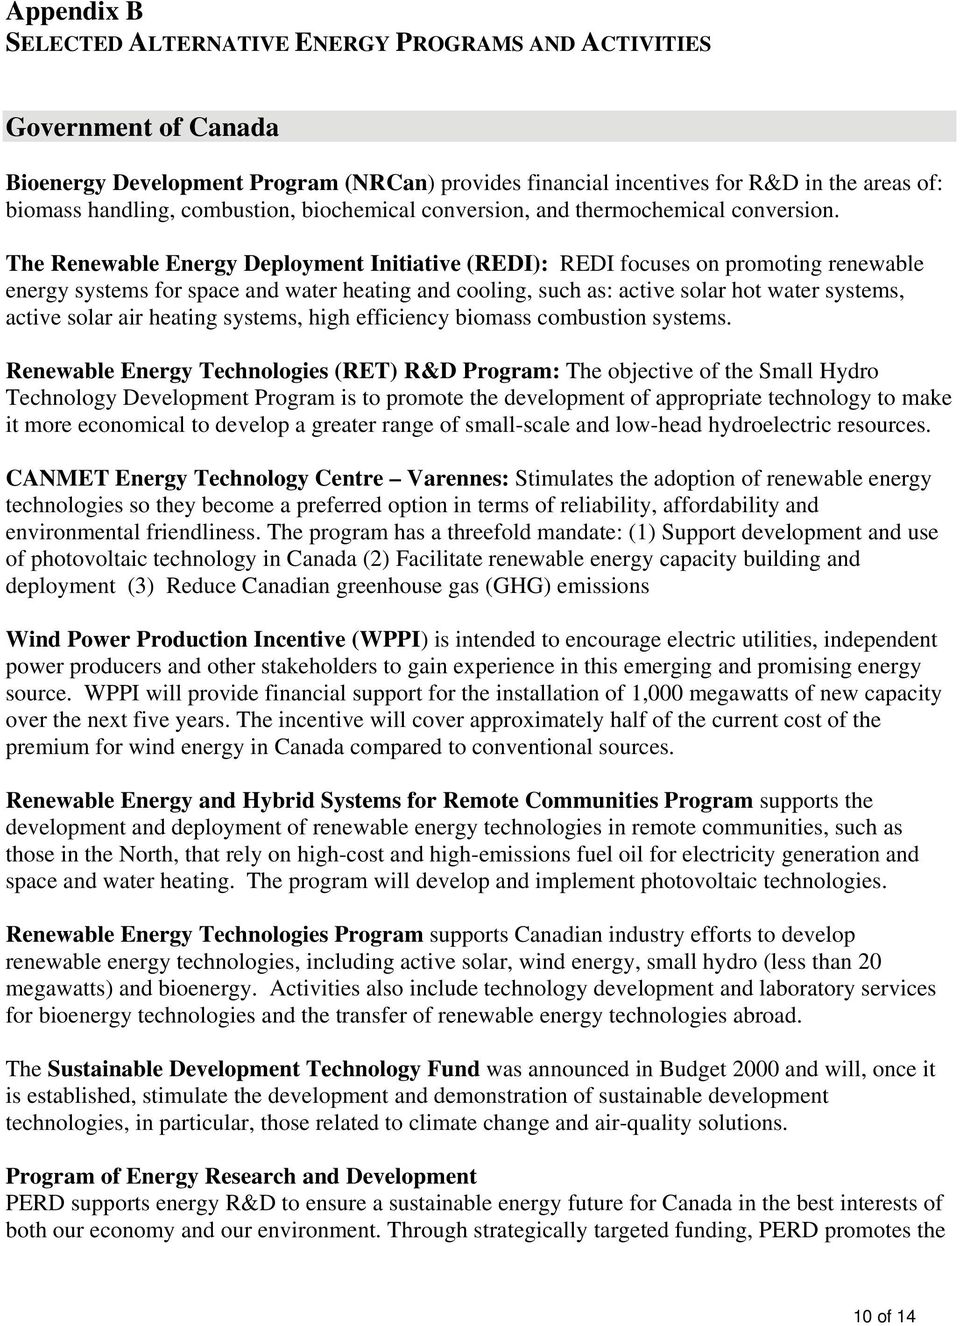 The Renewable Energy Deployment Initiative (REDI): REDI focuses on promoting renewable energy systems for space and water heating and cooling, such as: active solar hot water systems, active solar